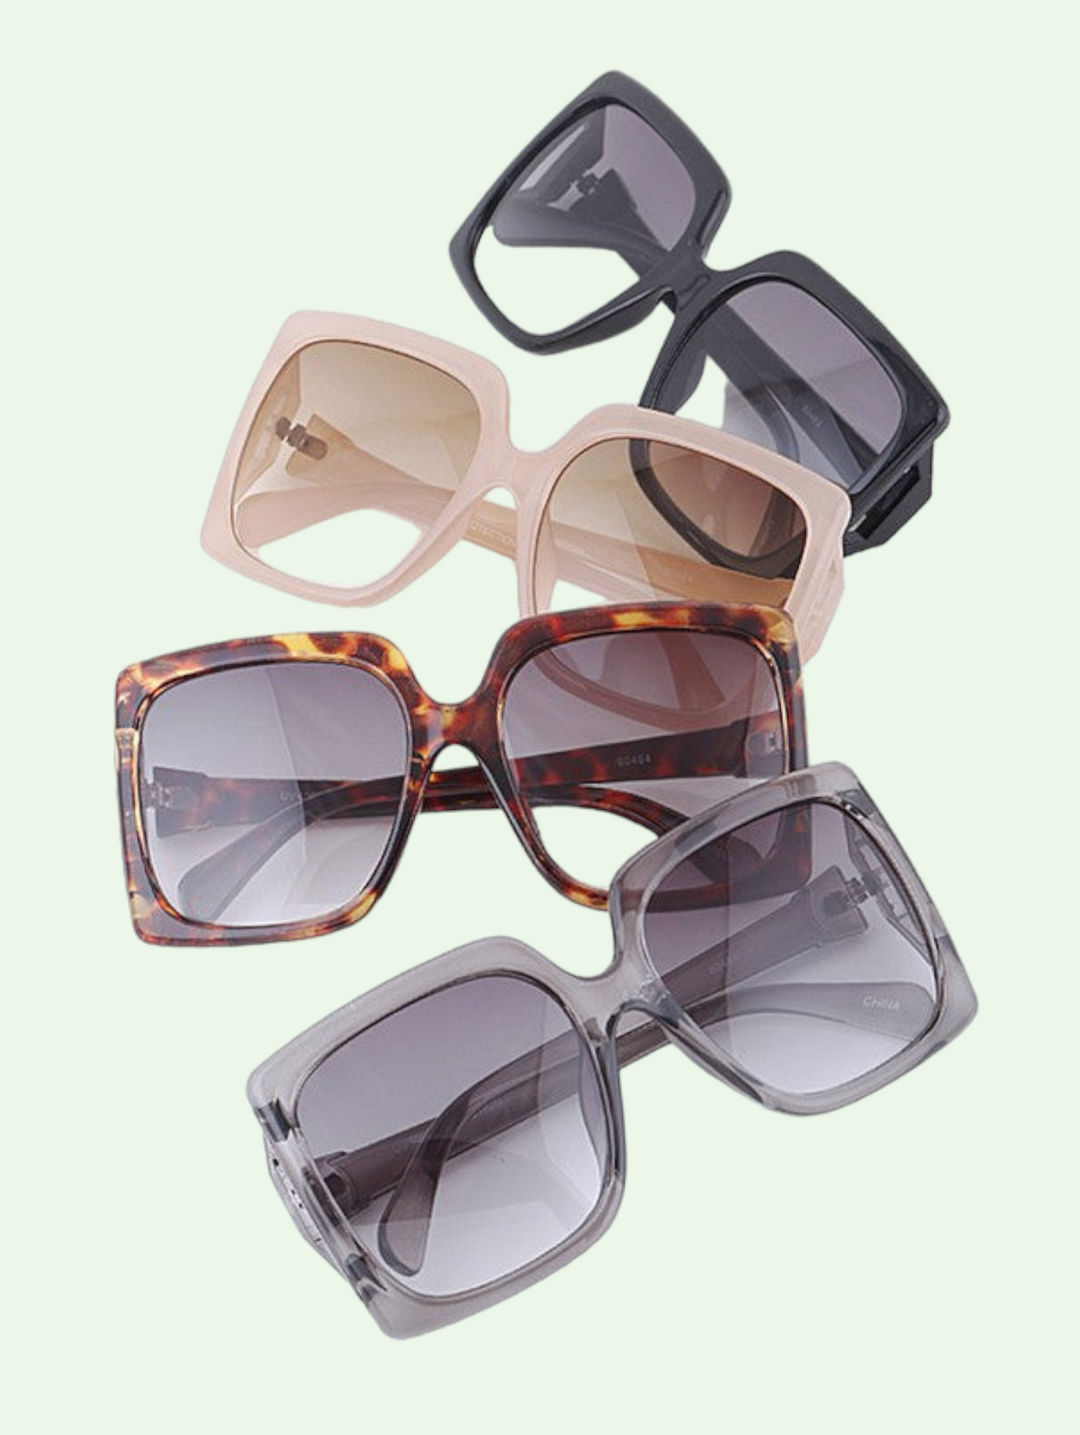 a group shot of all the colors of the beautiful spy sunglasses